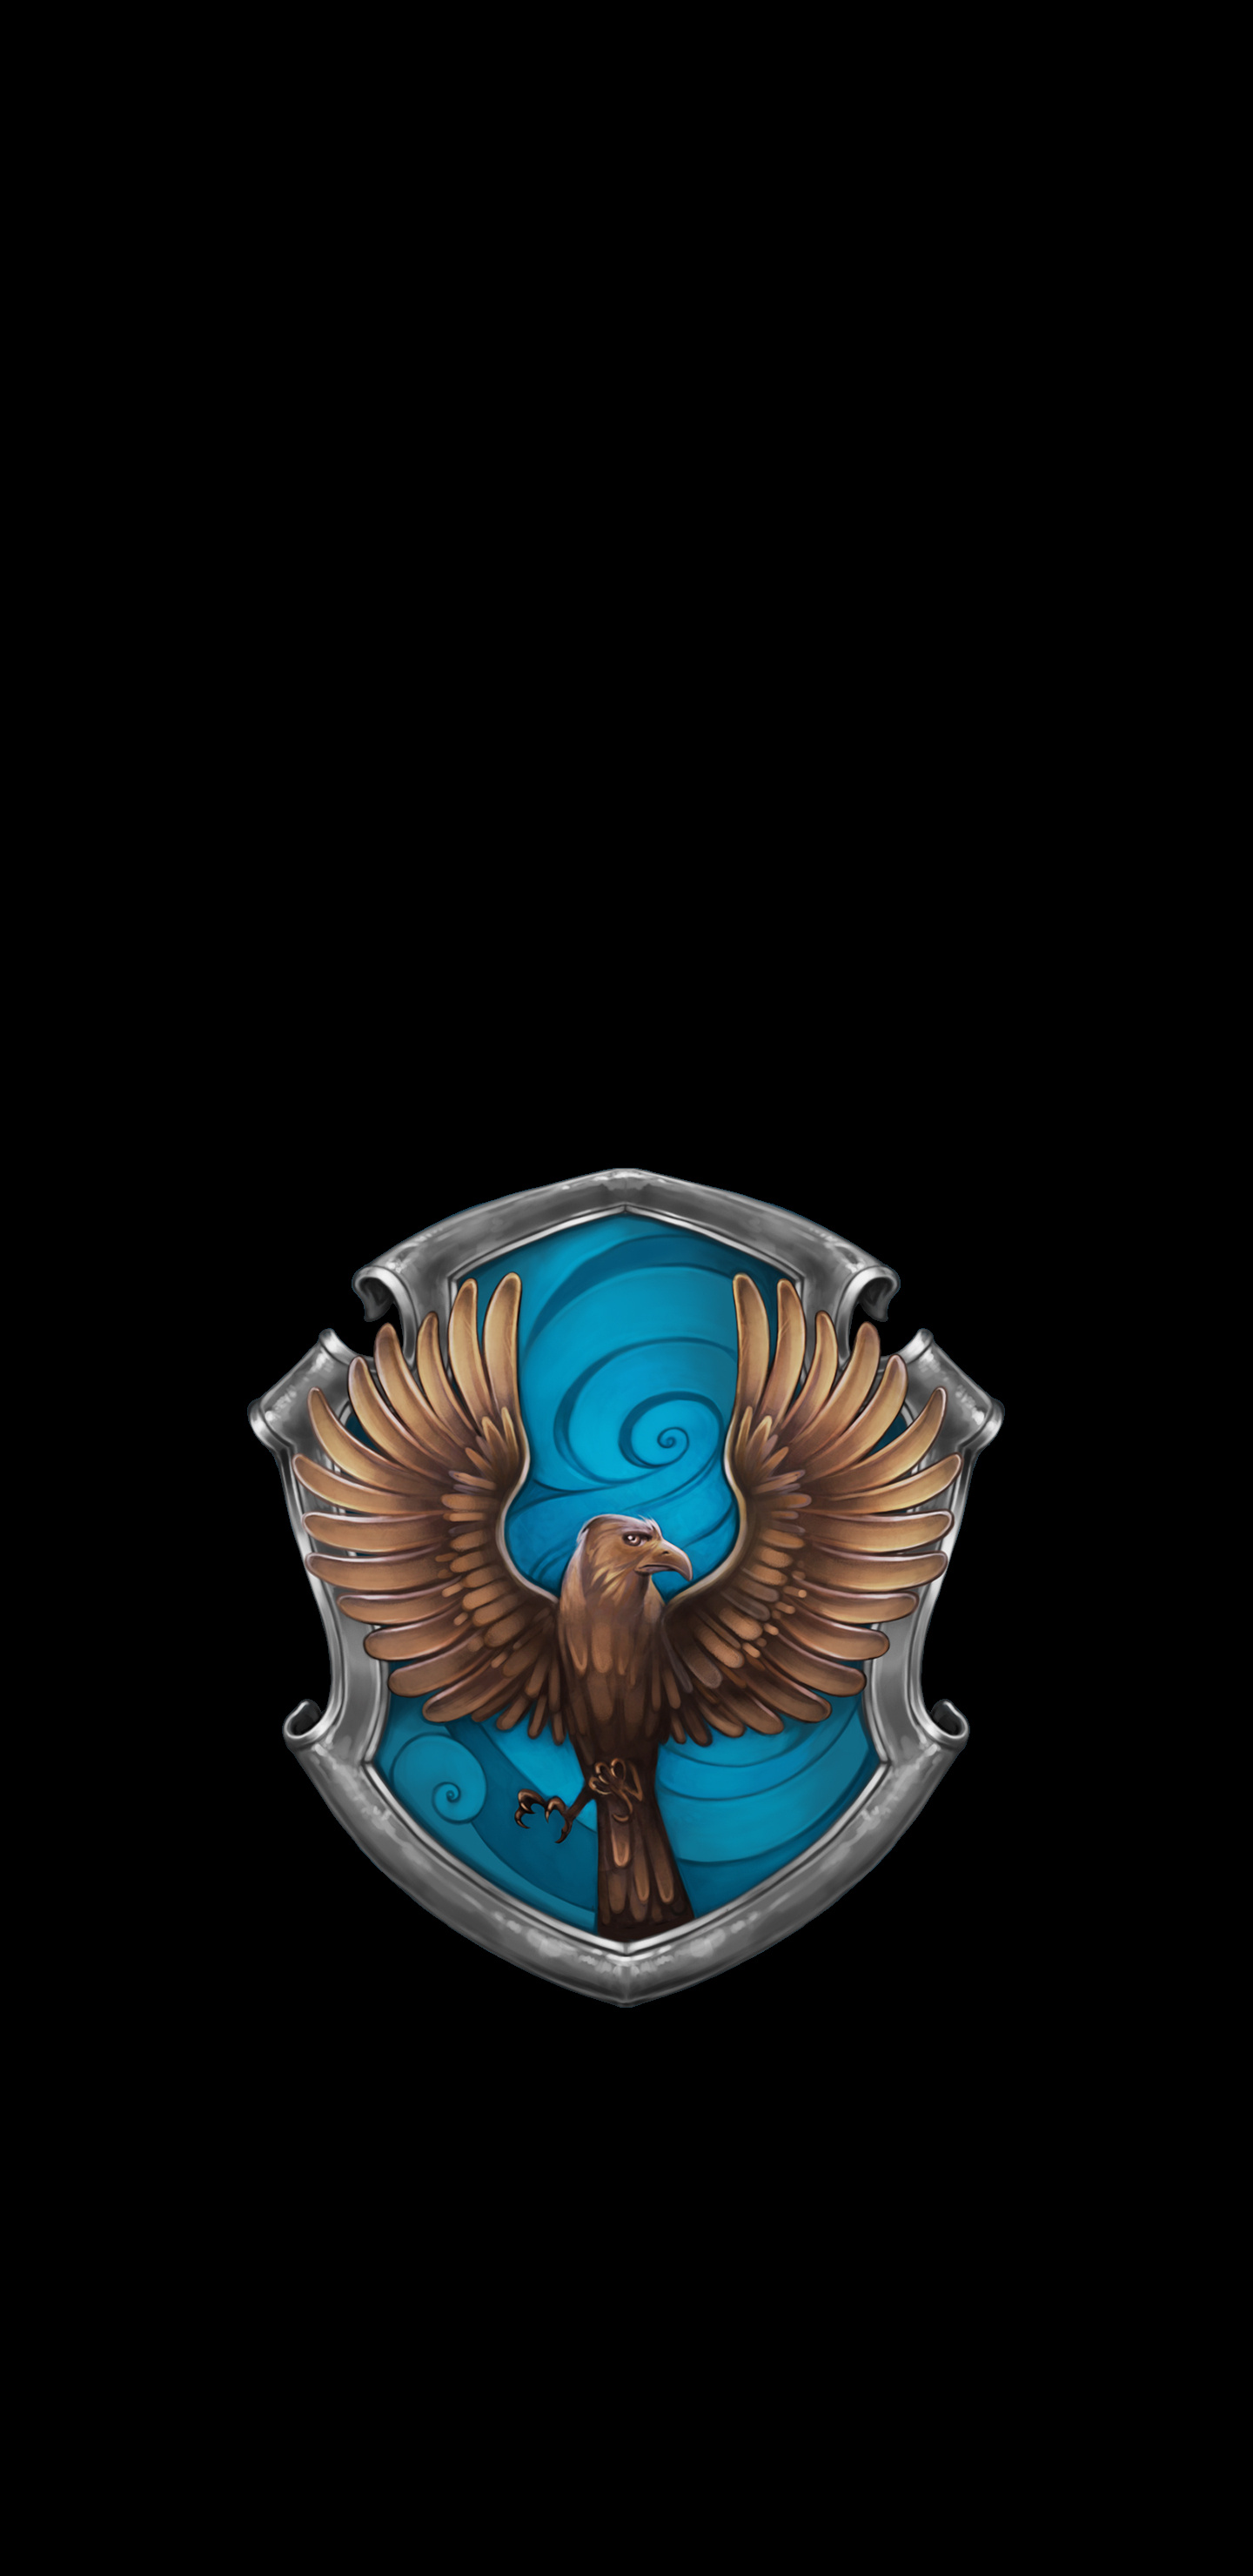 House Ravenclaw wallpaper by MhmtGlyn - Download on ZEDGE™ | 0f88